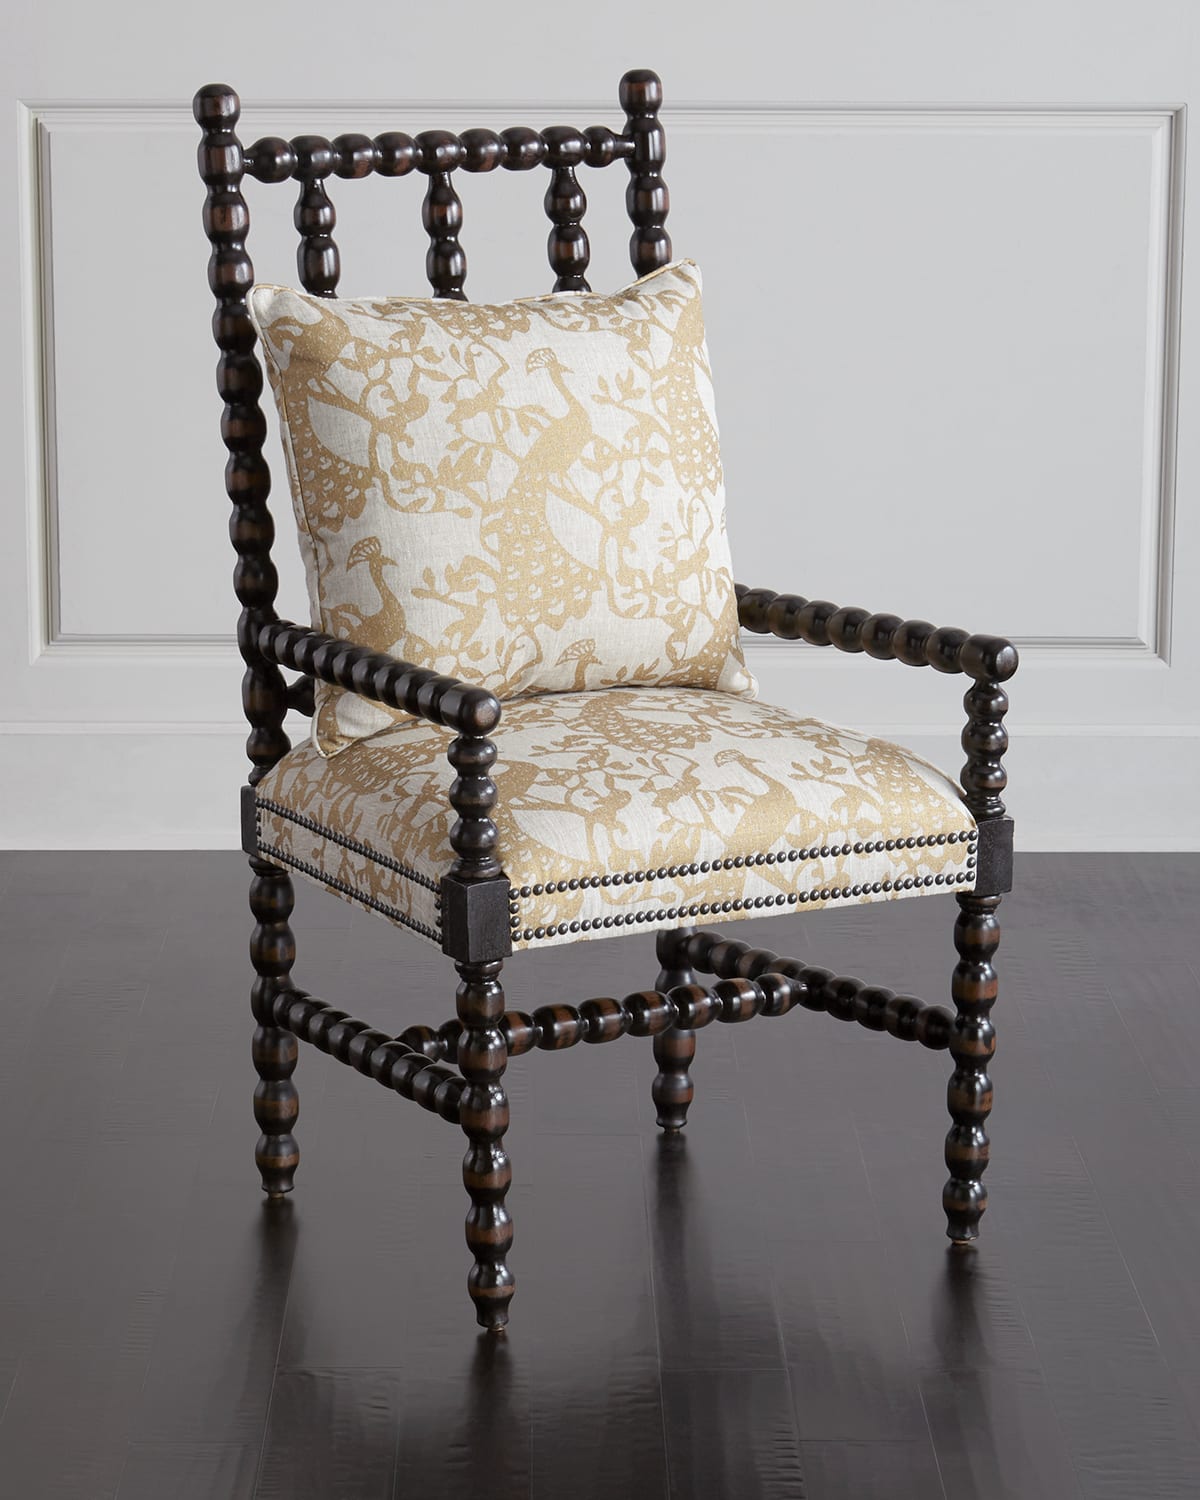 Peninsula Home Collection Harley Dining Chair